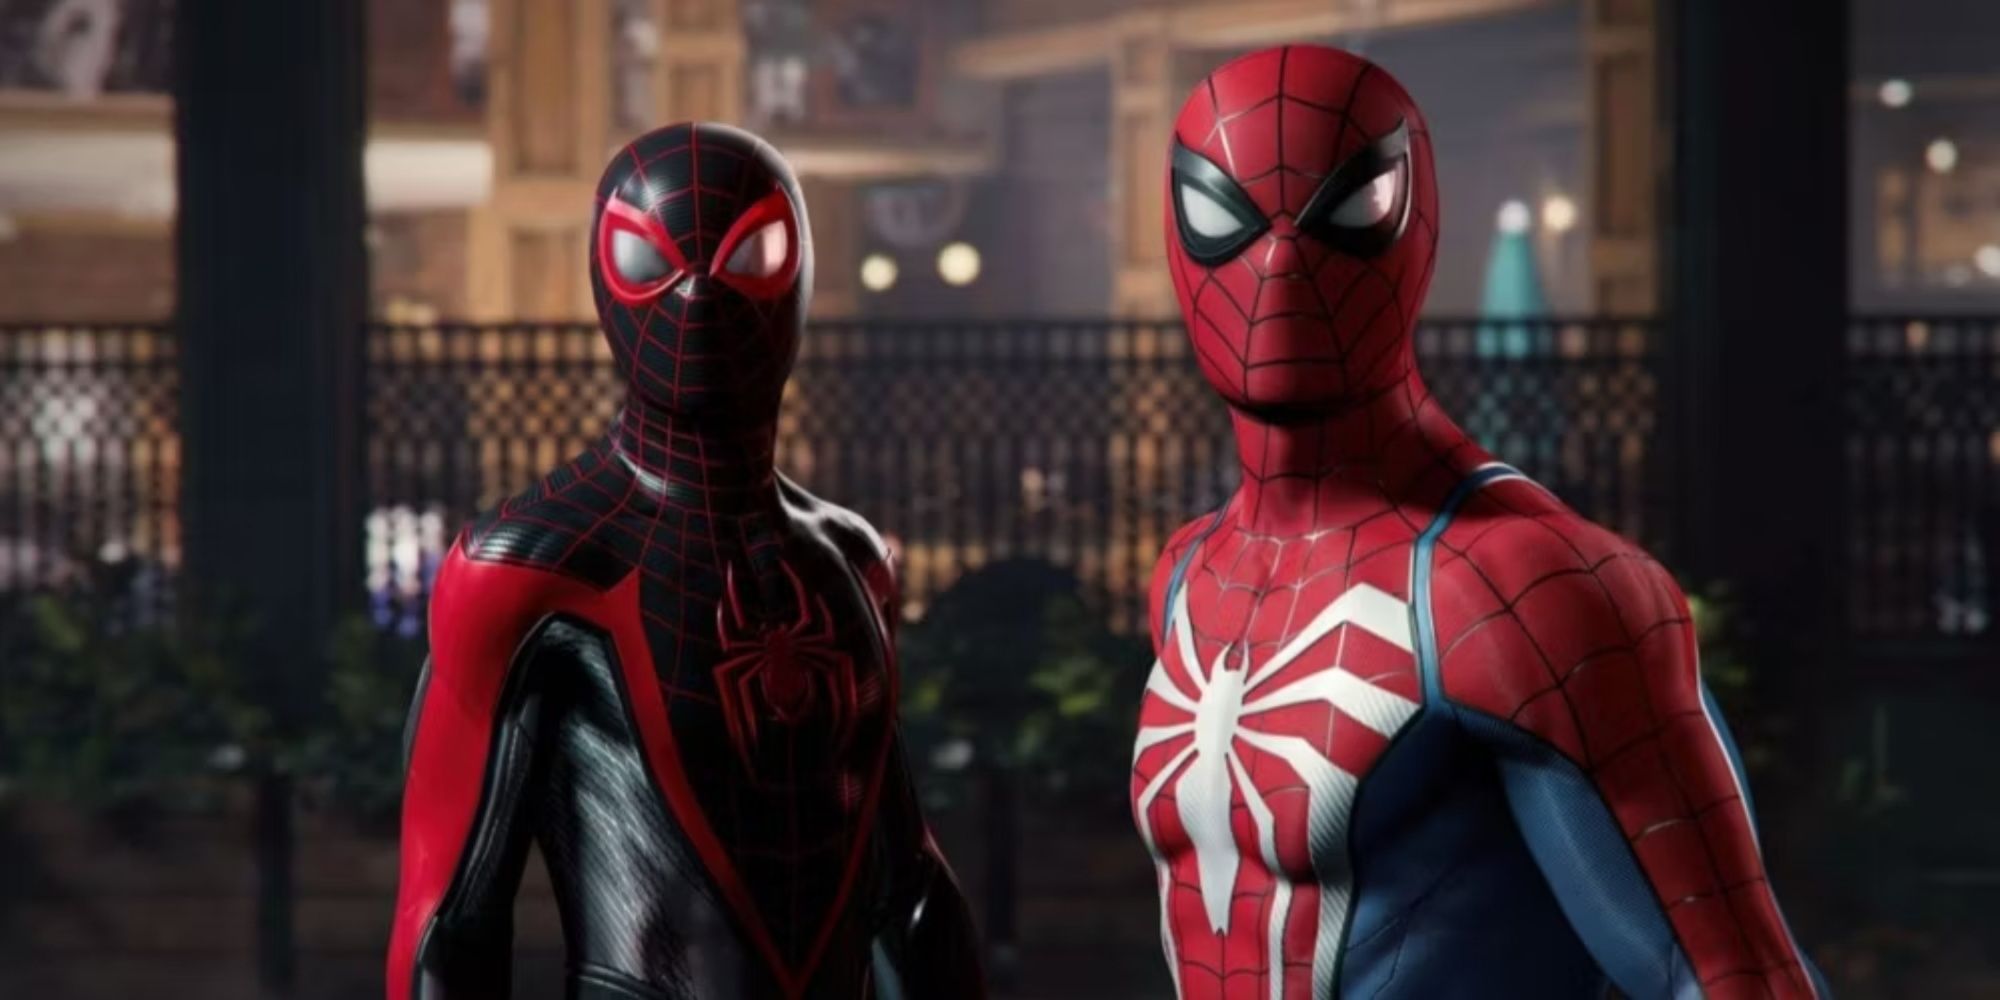 Peter and Miles standing side-by-side in awe of the symbiote monstrosity Venom revealing itself to them.